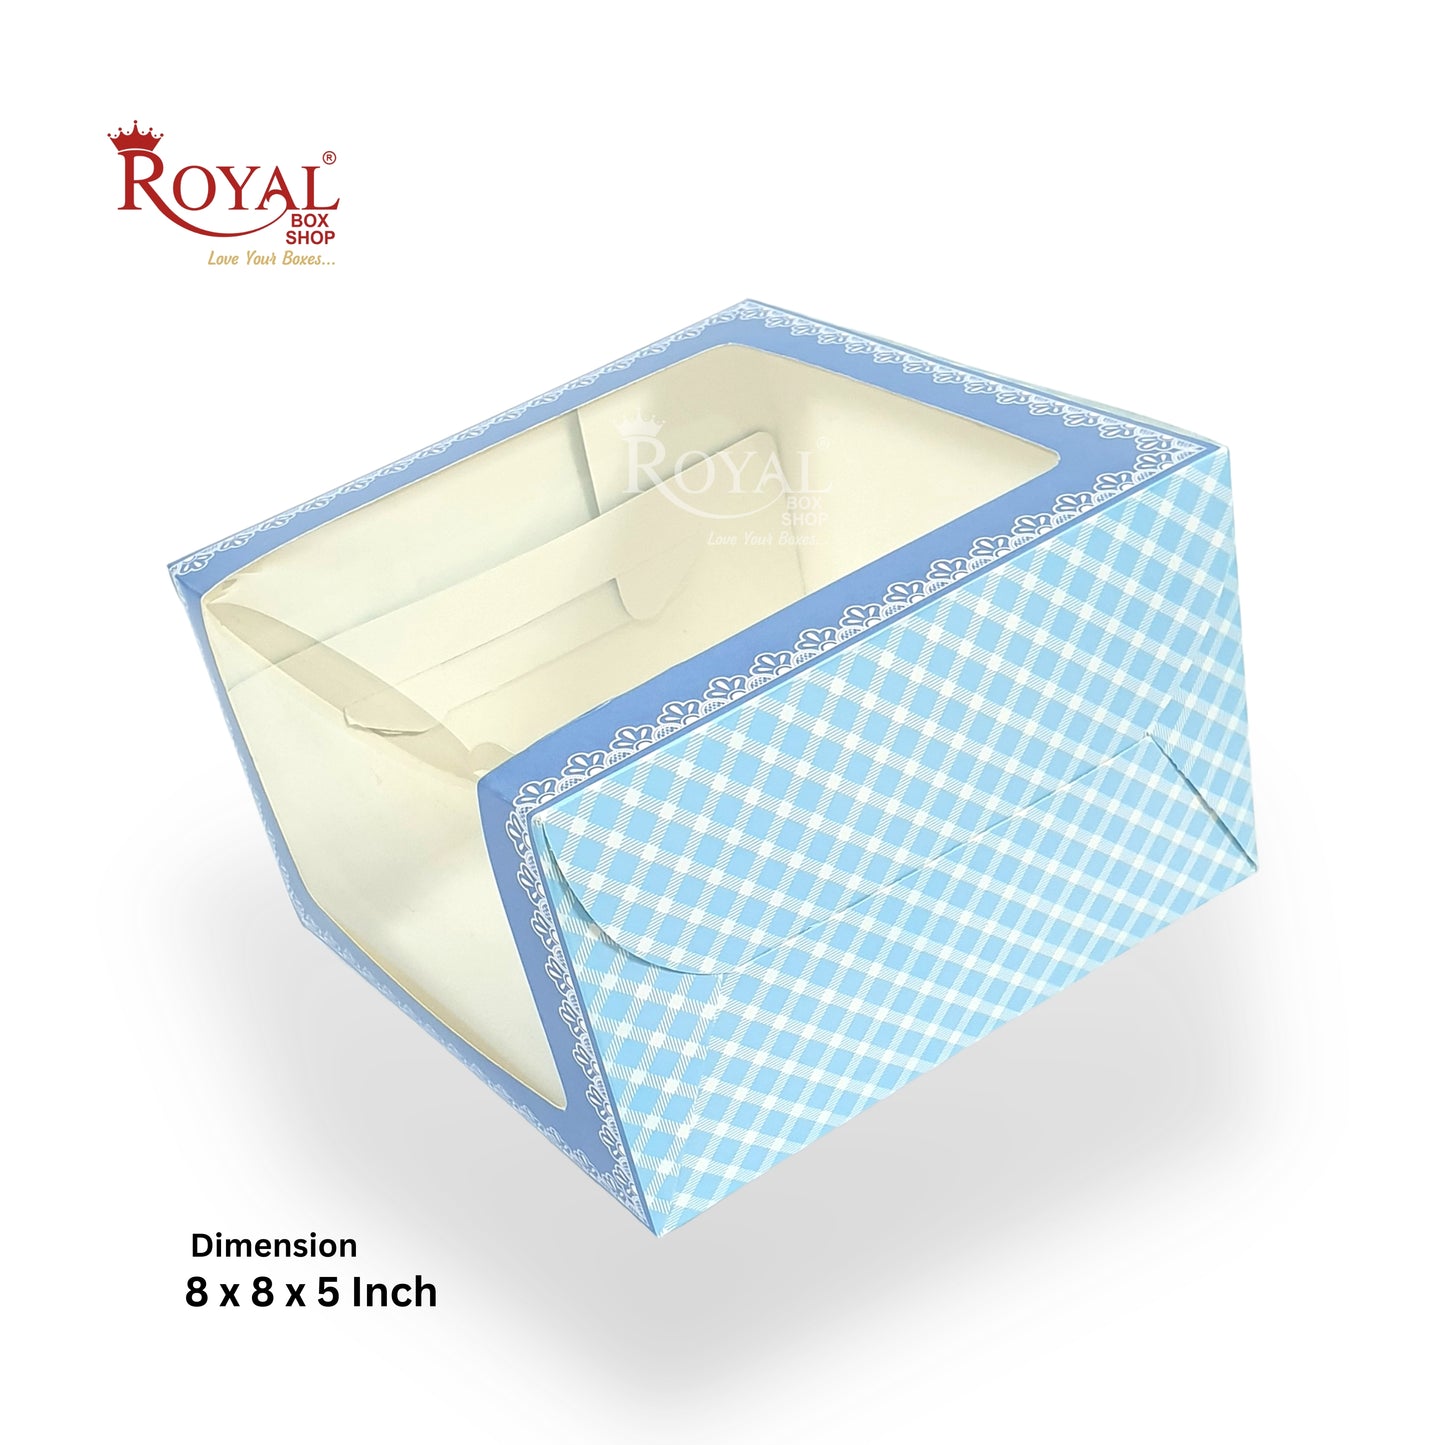 L-Shape Window Cake Box I Blue Check I 8x8x5" Inch | Perfect for Half Kg Cakes Cookies, Candies, & Room Hampers